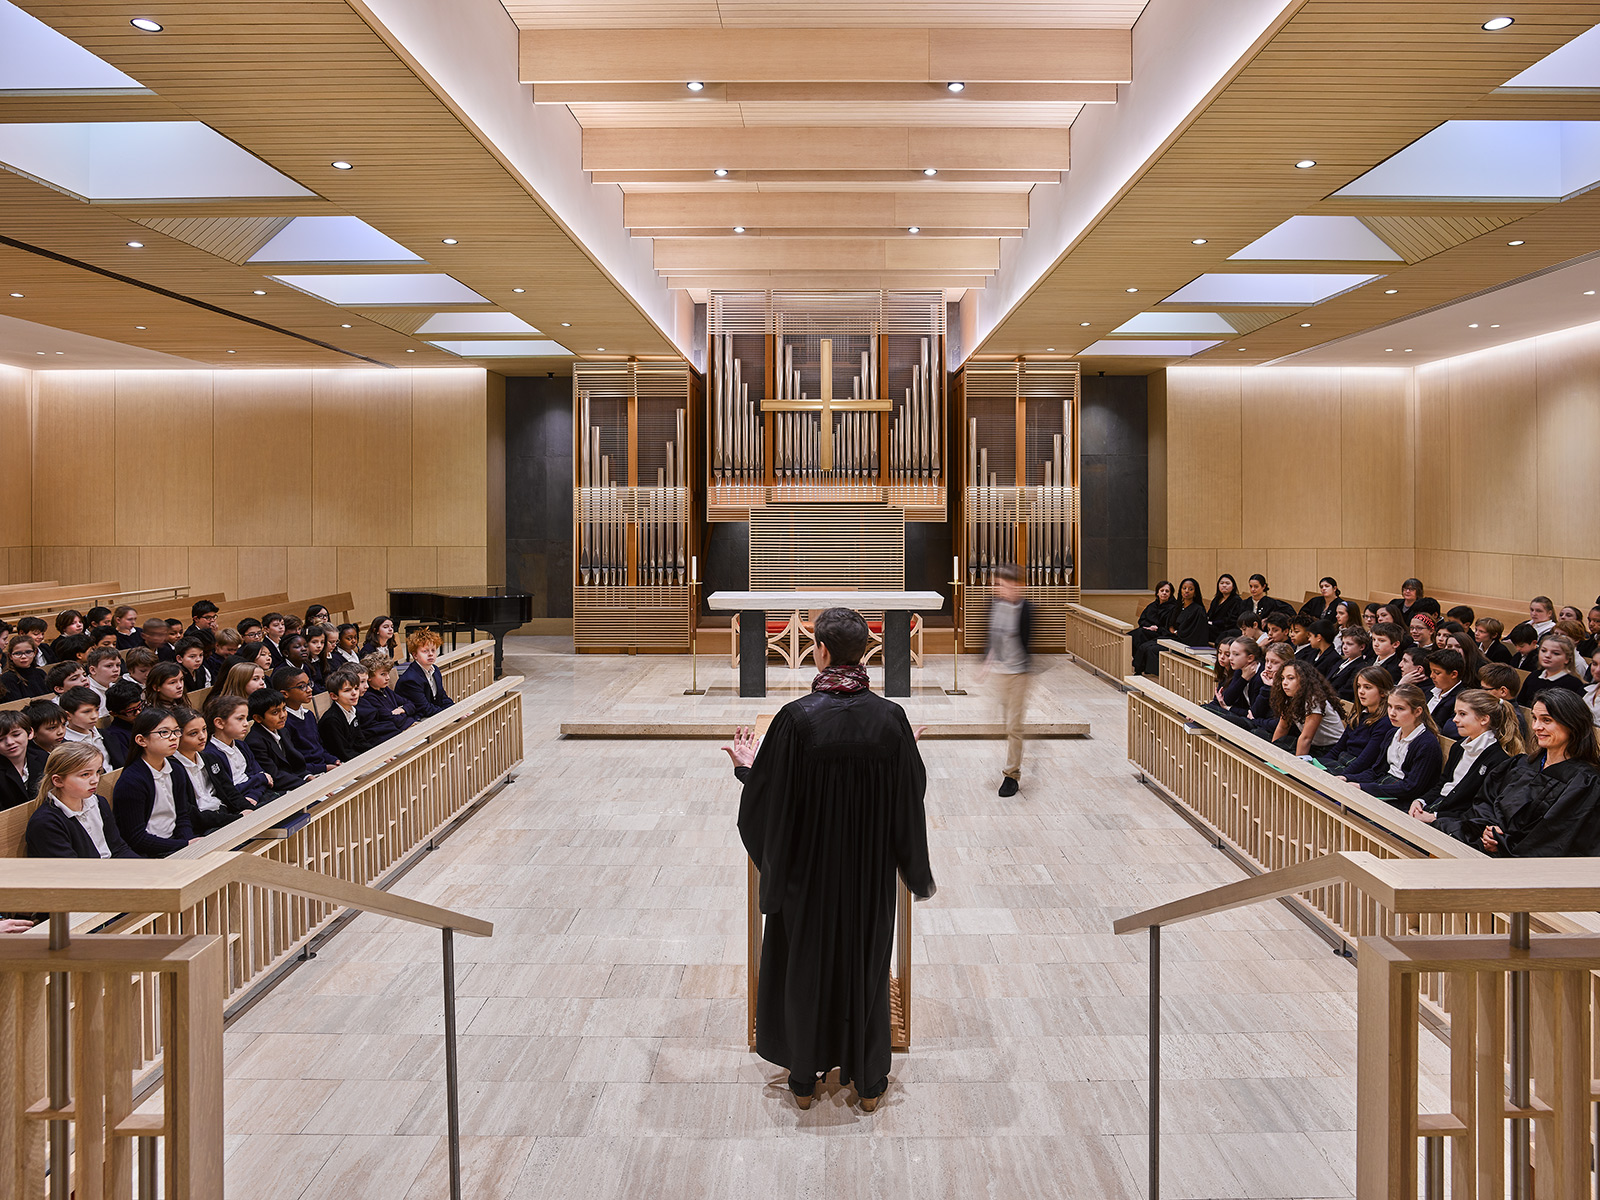 The chapel serves as the heart of the school and its wider community